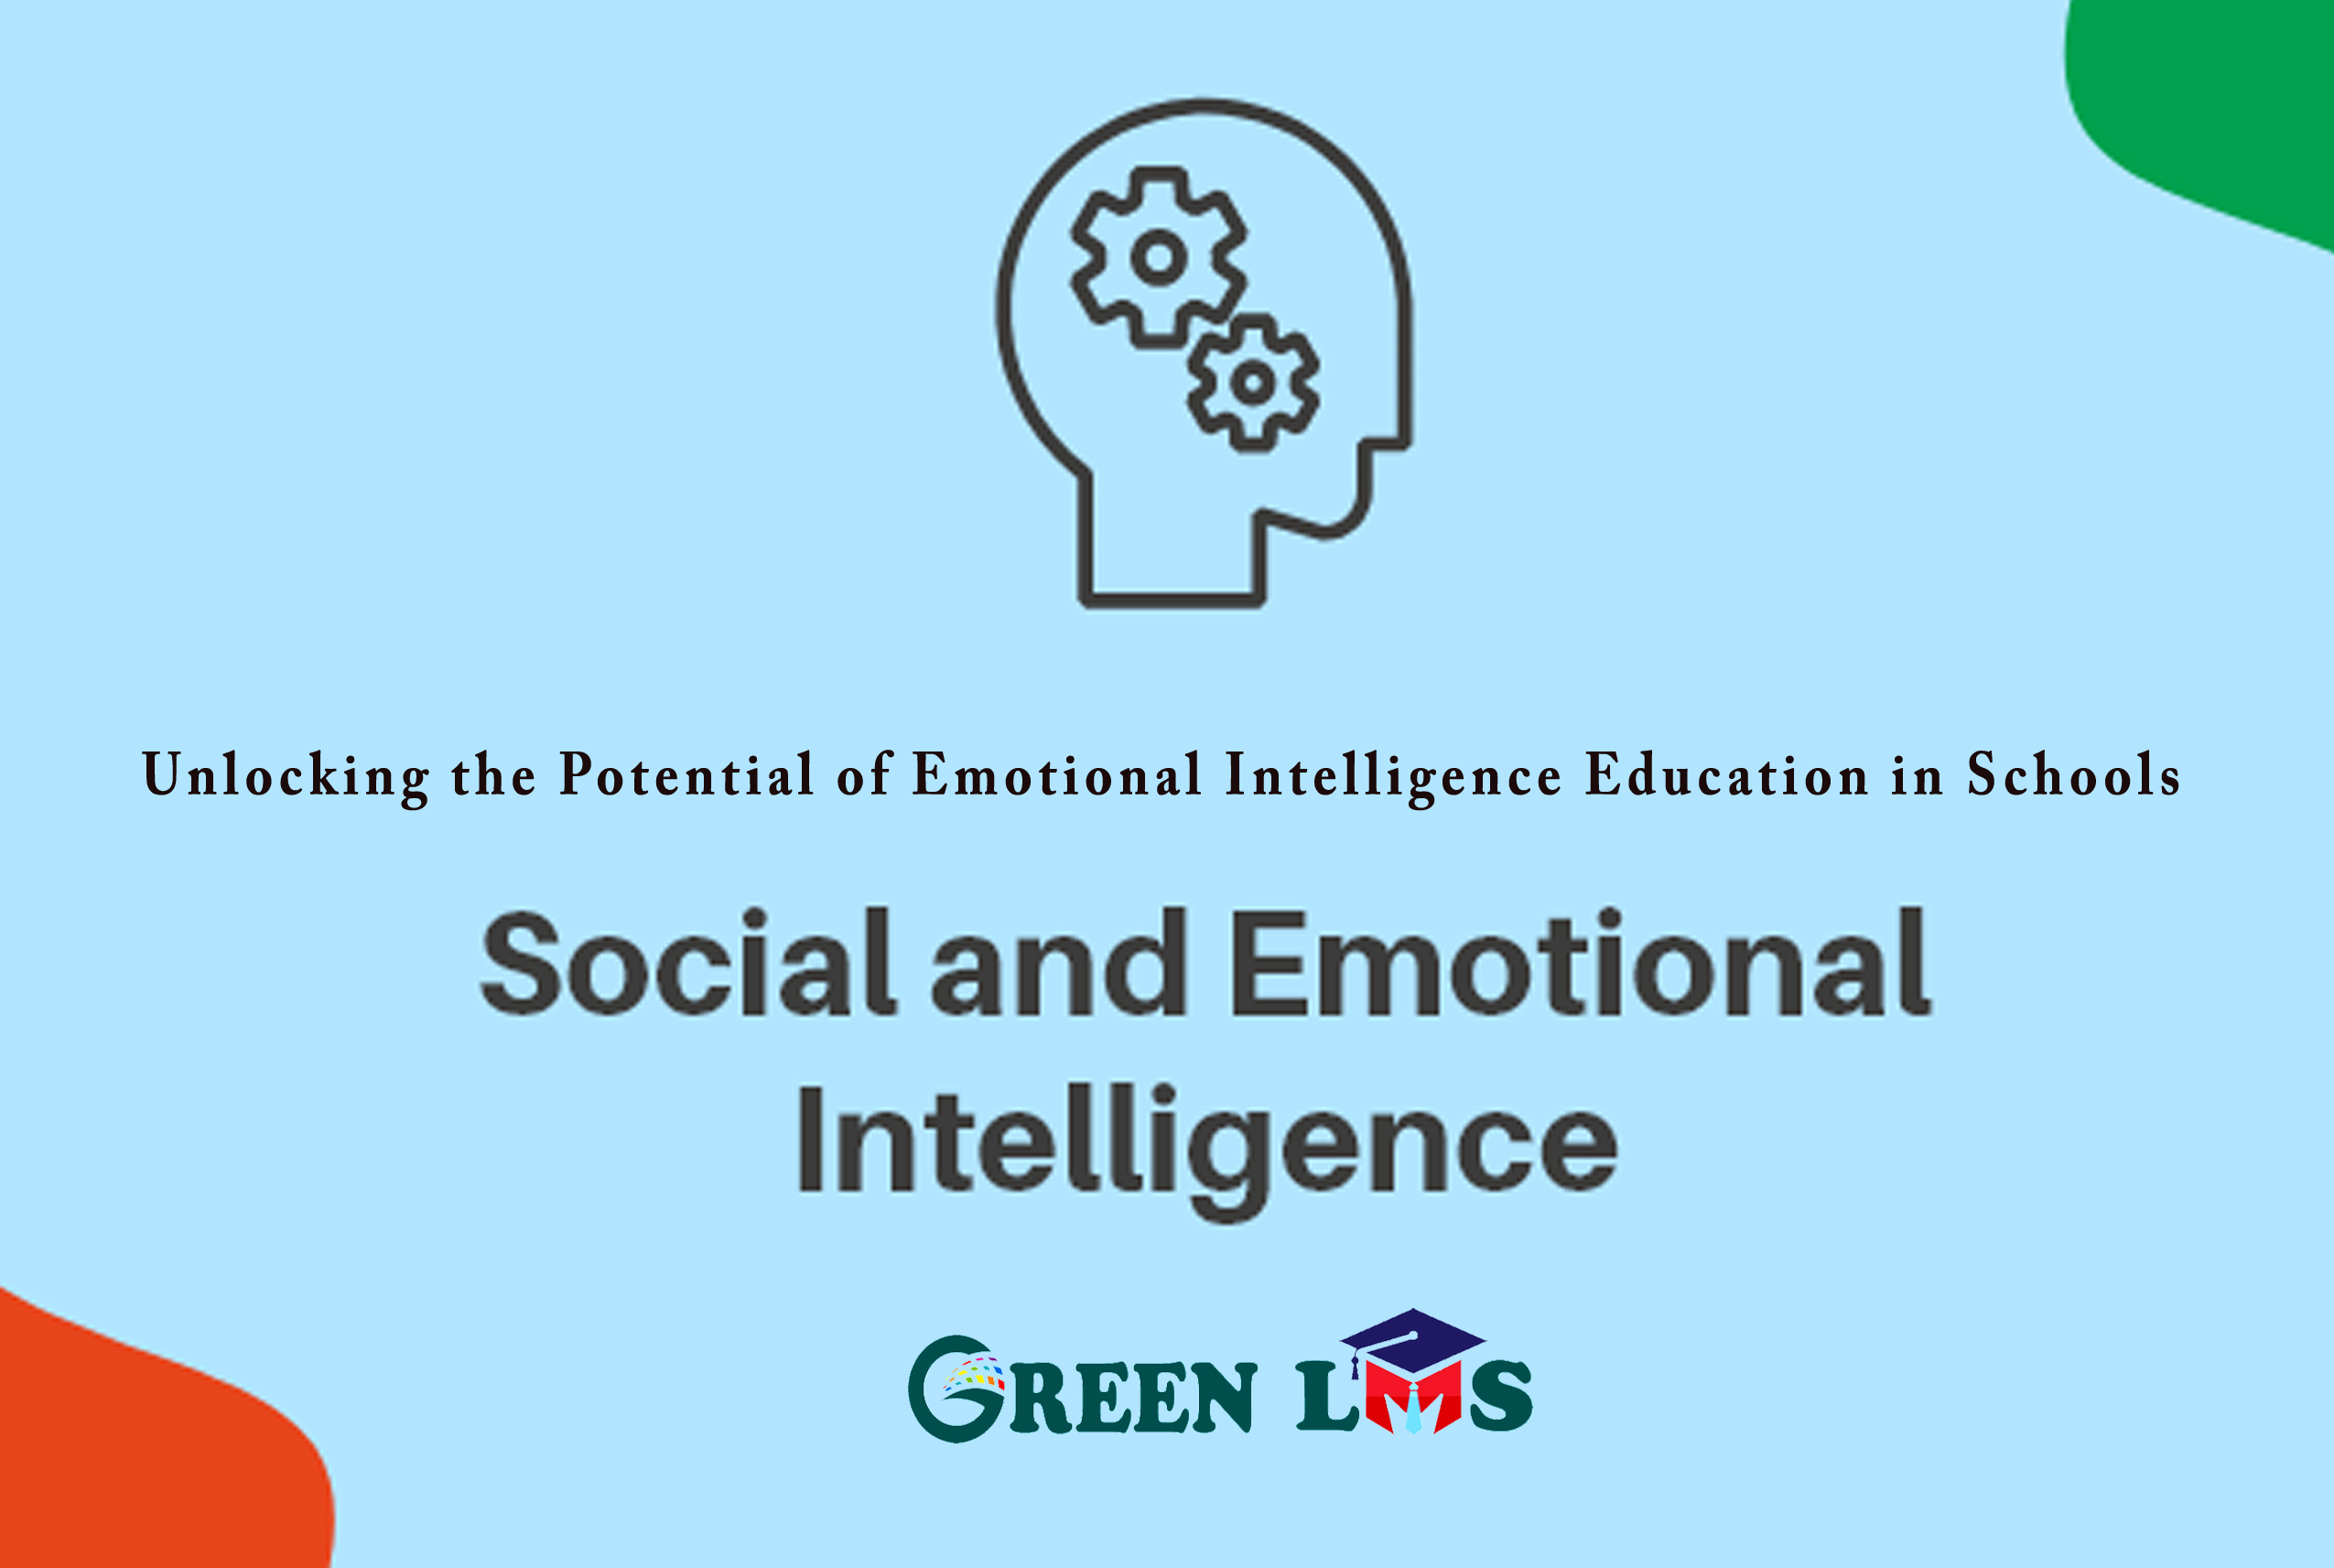 Unlocking the Potential of Emotional Intelligence Education in Schools